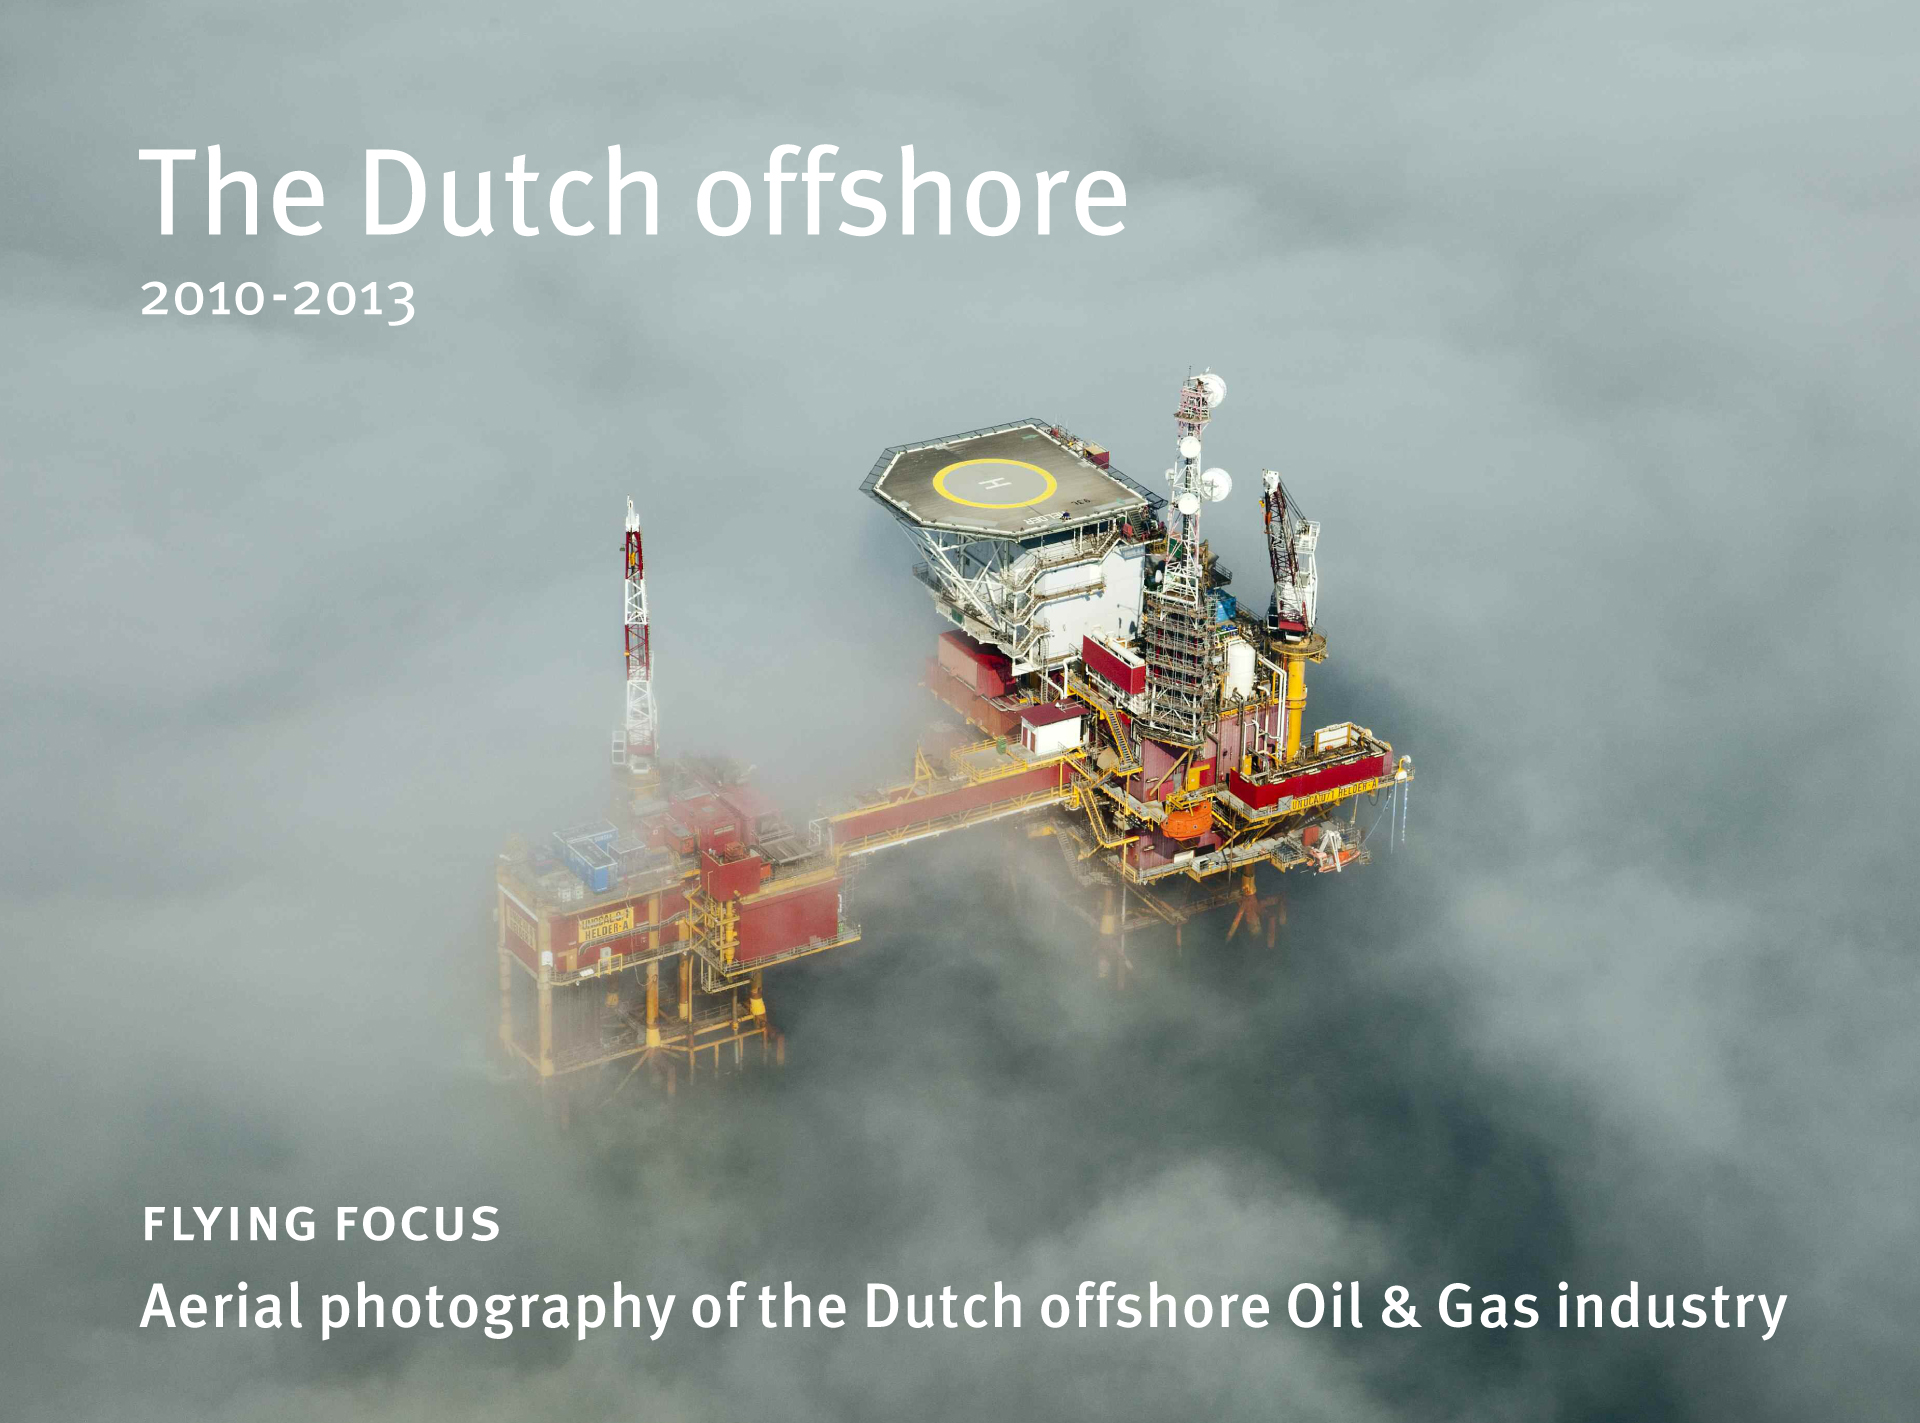 The Dutch offshore: 2010-2013